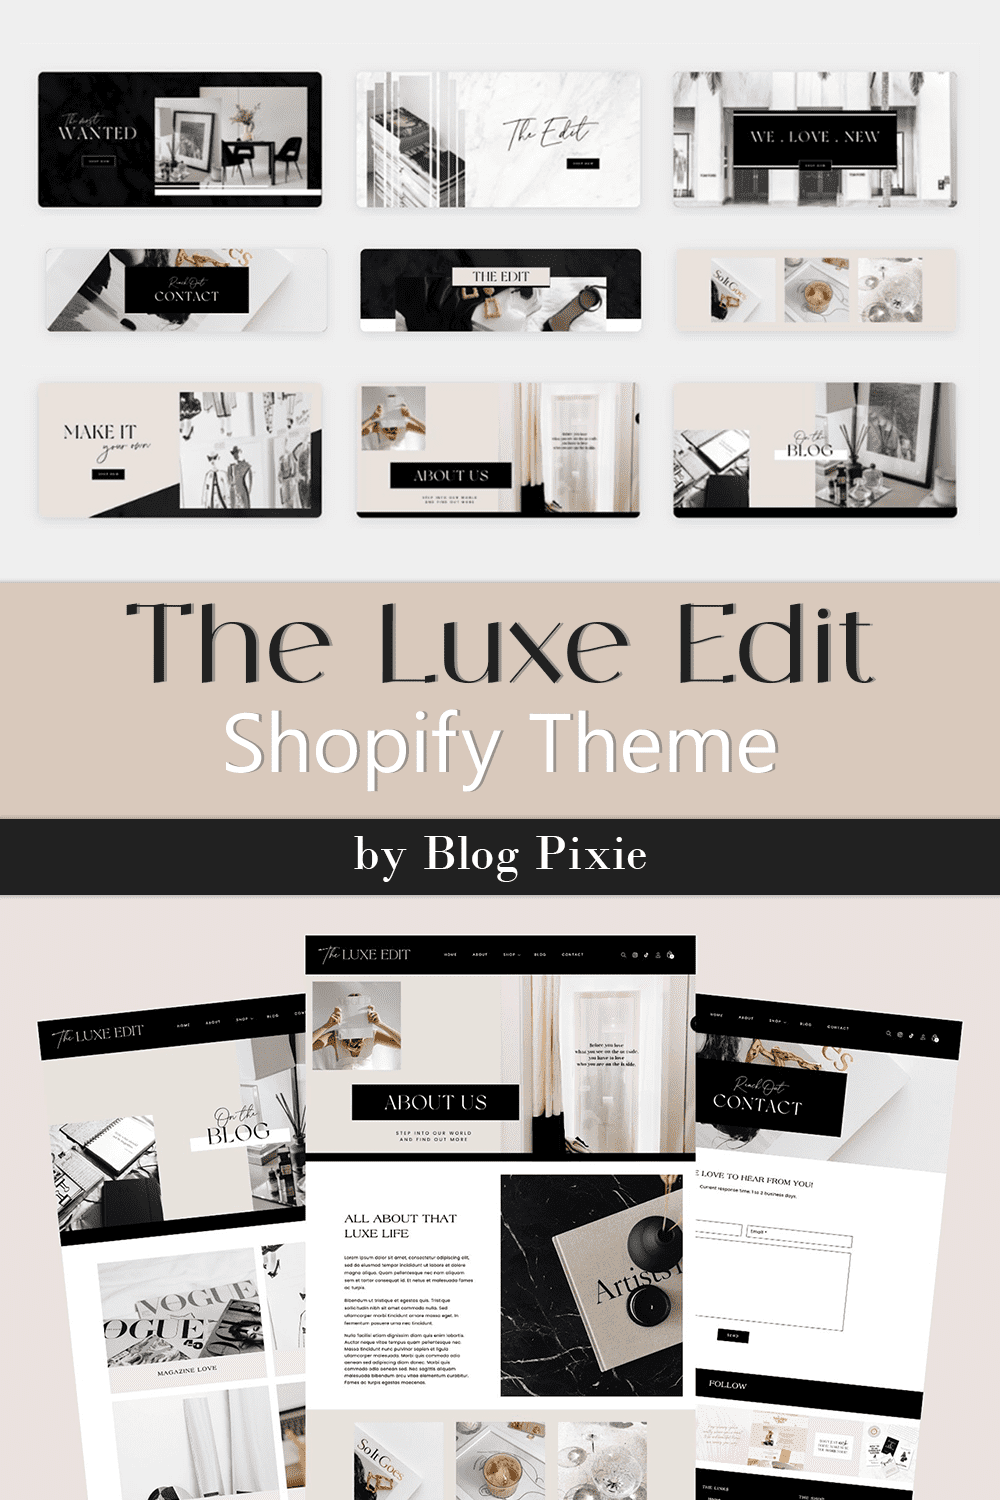 Image collection of gorgeous shopify template pages.